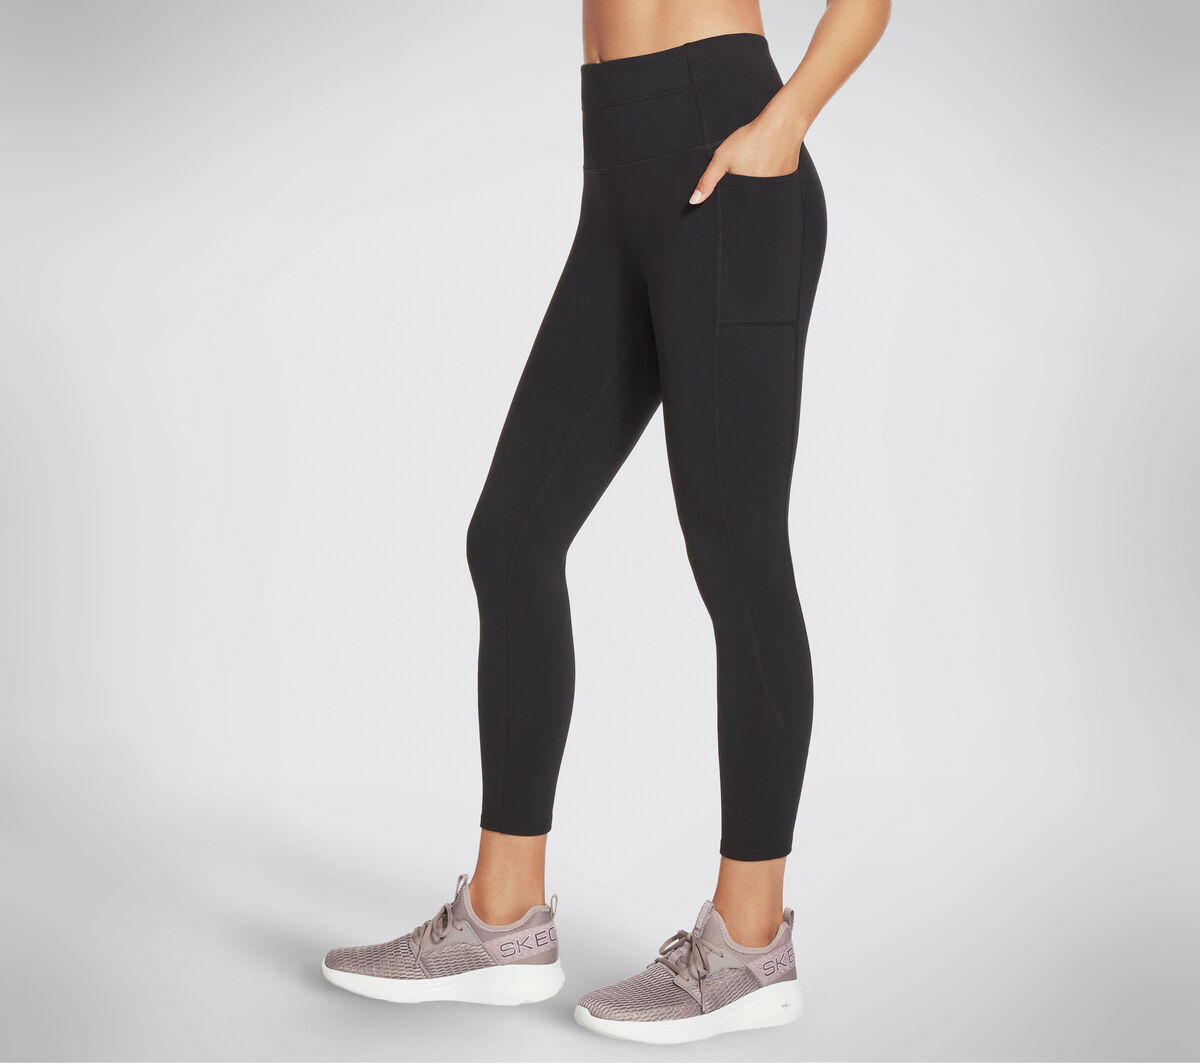 SKECHERS - Get up and going in stylish athletic comfort the #Skechers GOwalk™  Midnight Leopard 7/8 HW Legging 🐆🐆